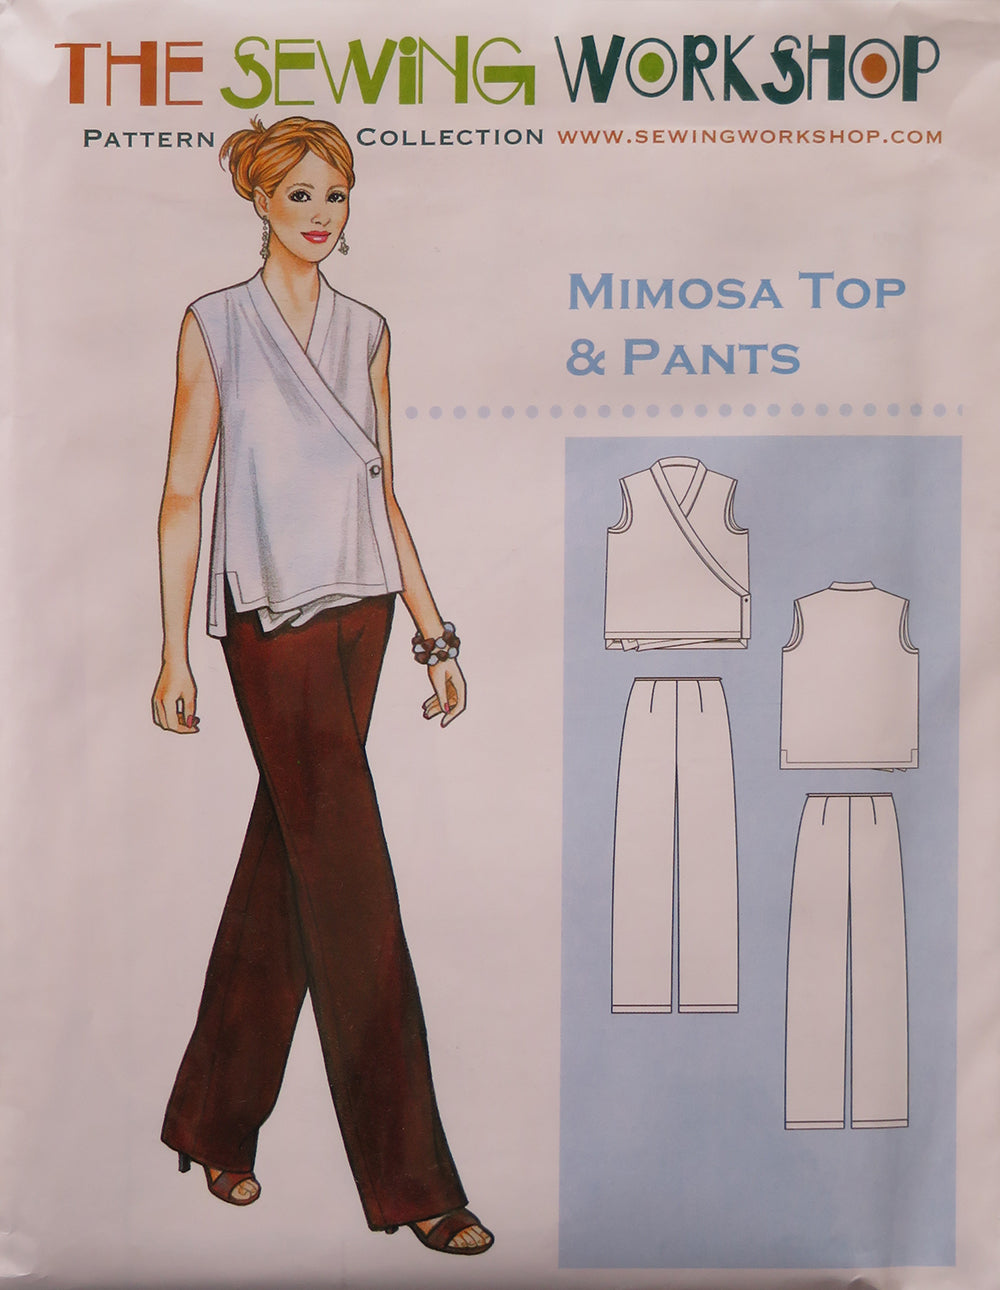 The Sewing Workshop Mimosa Top & Pant